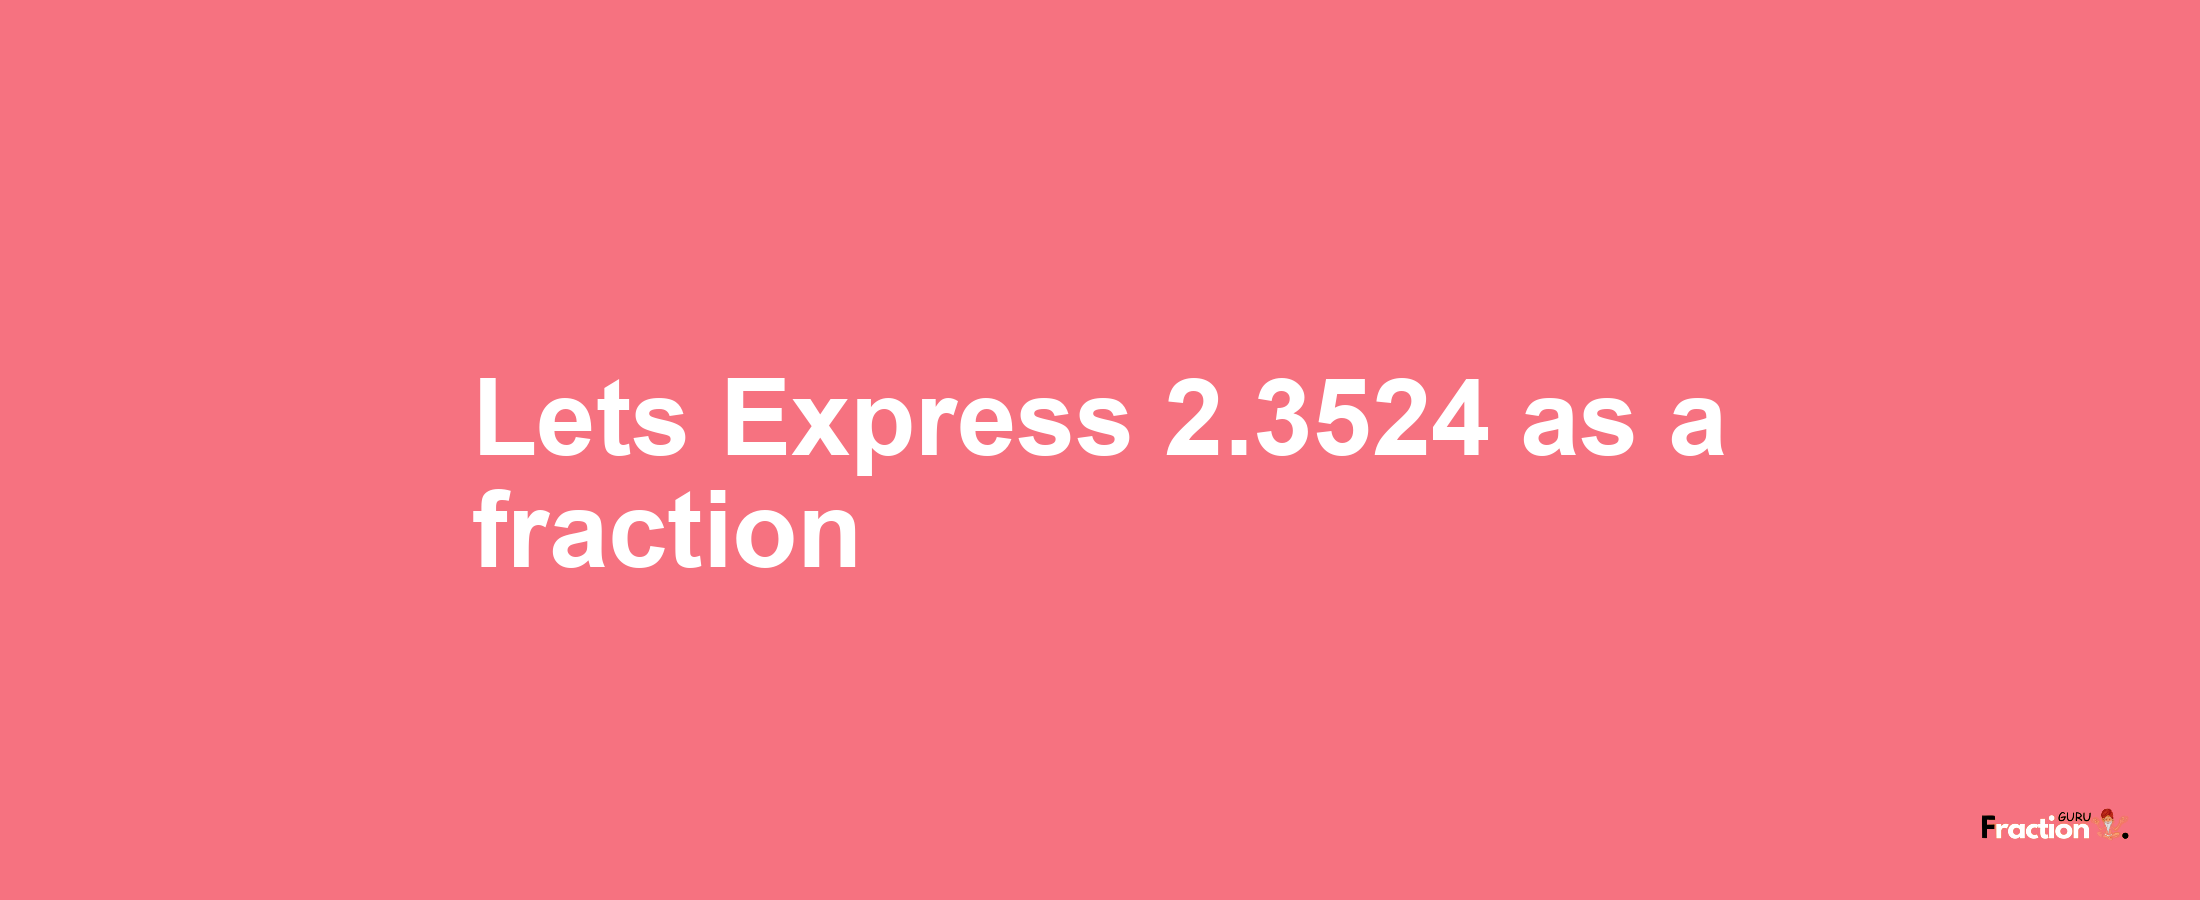 Lets Express 2.3524 as afraction